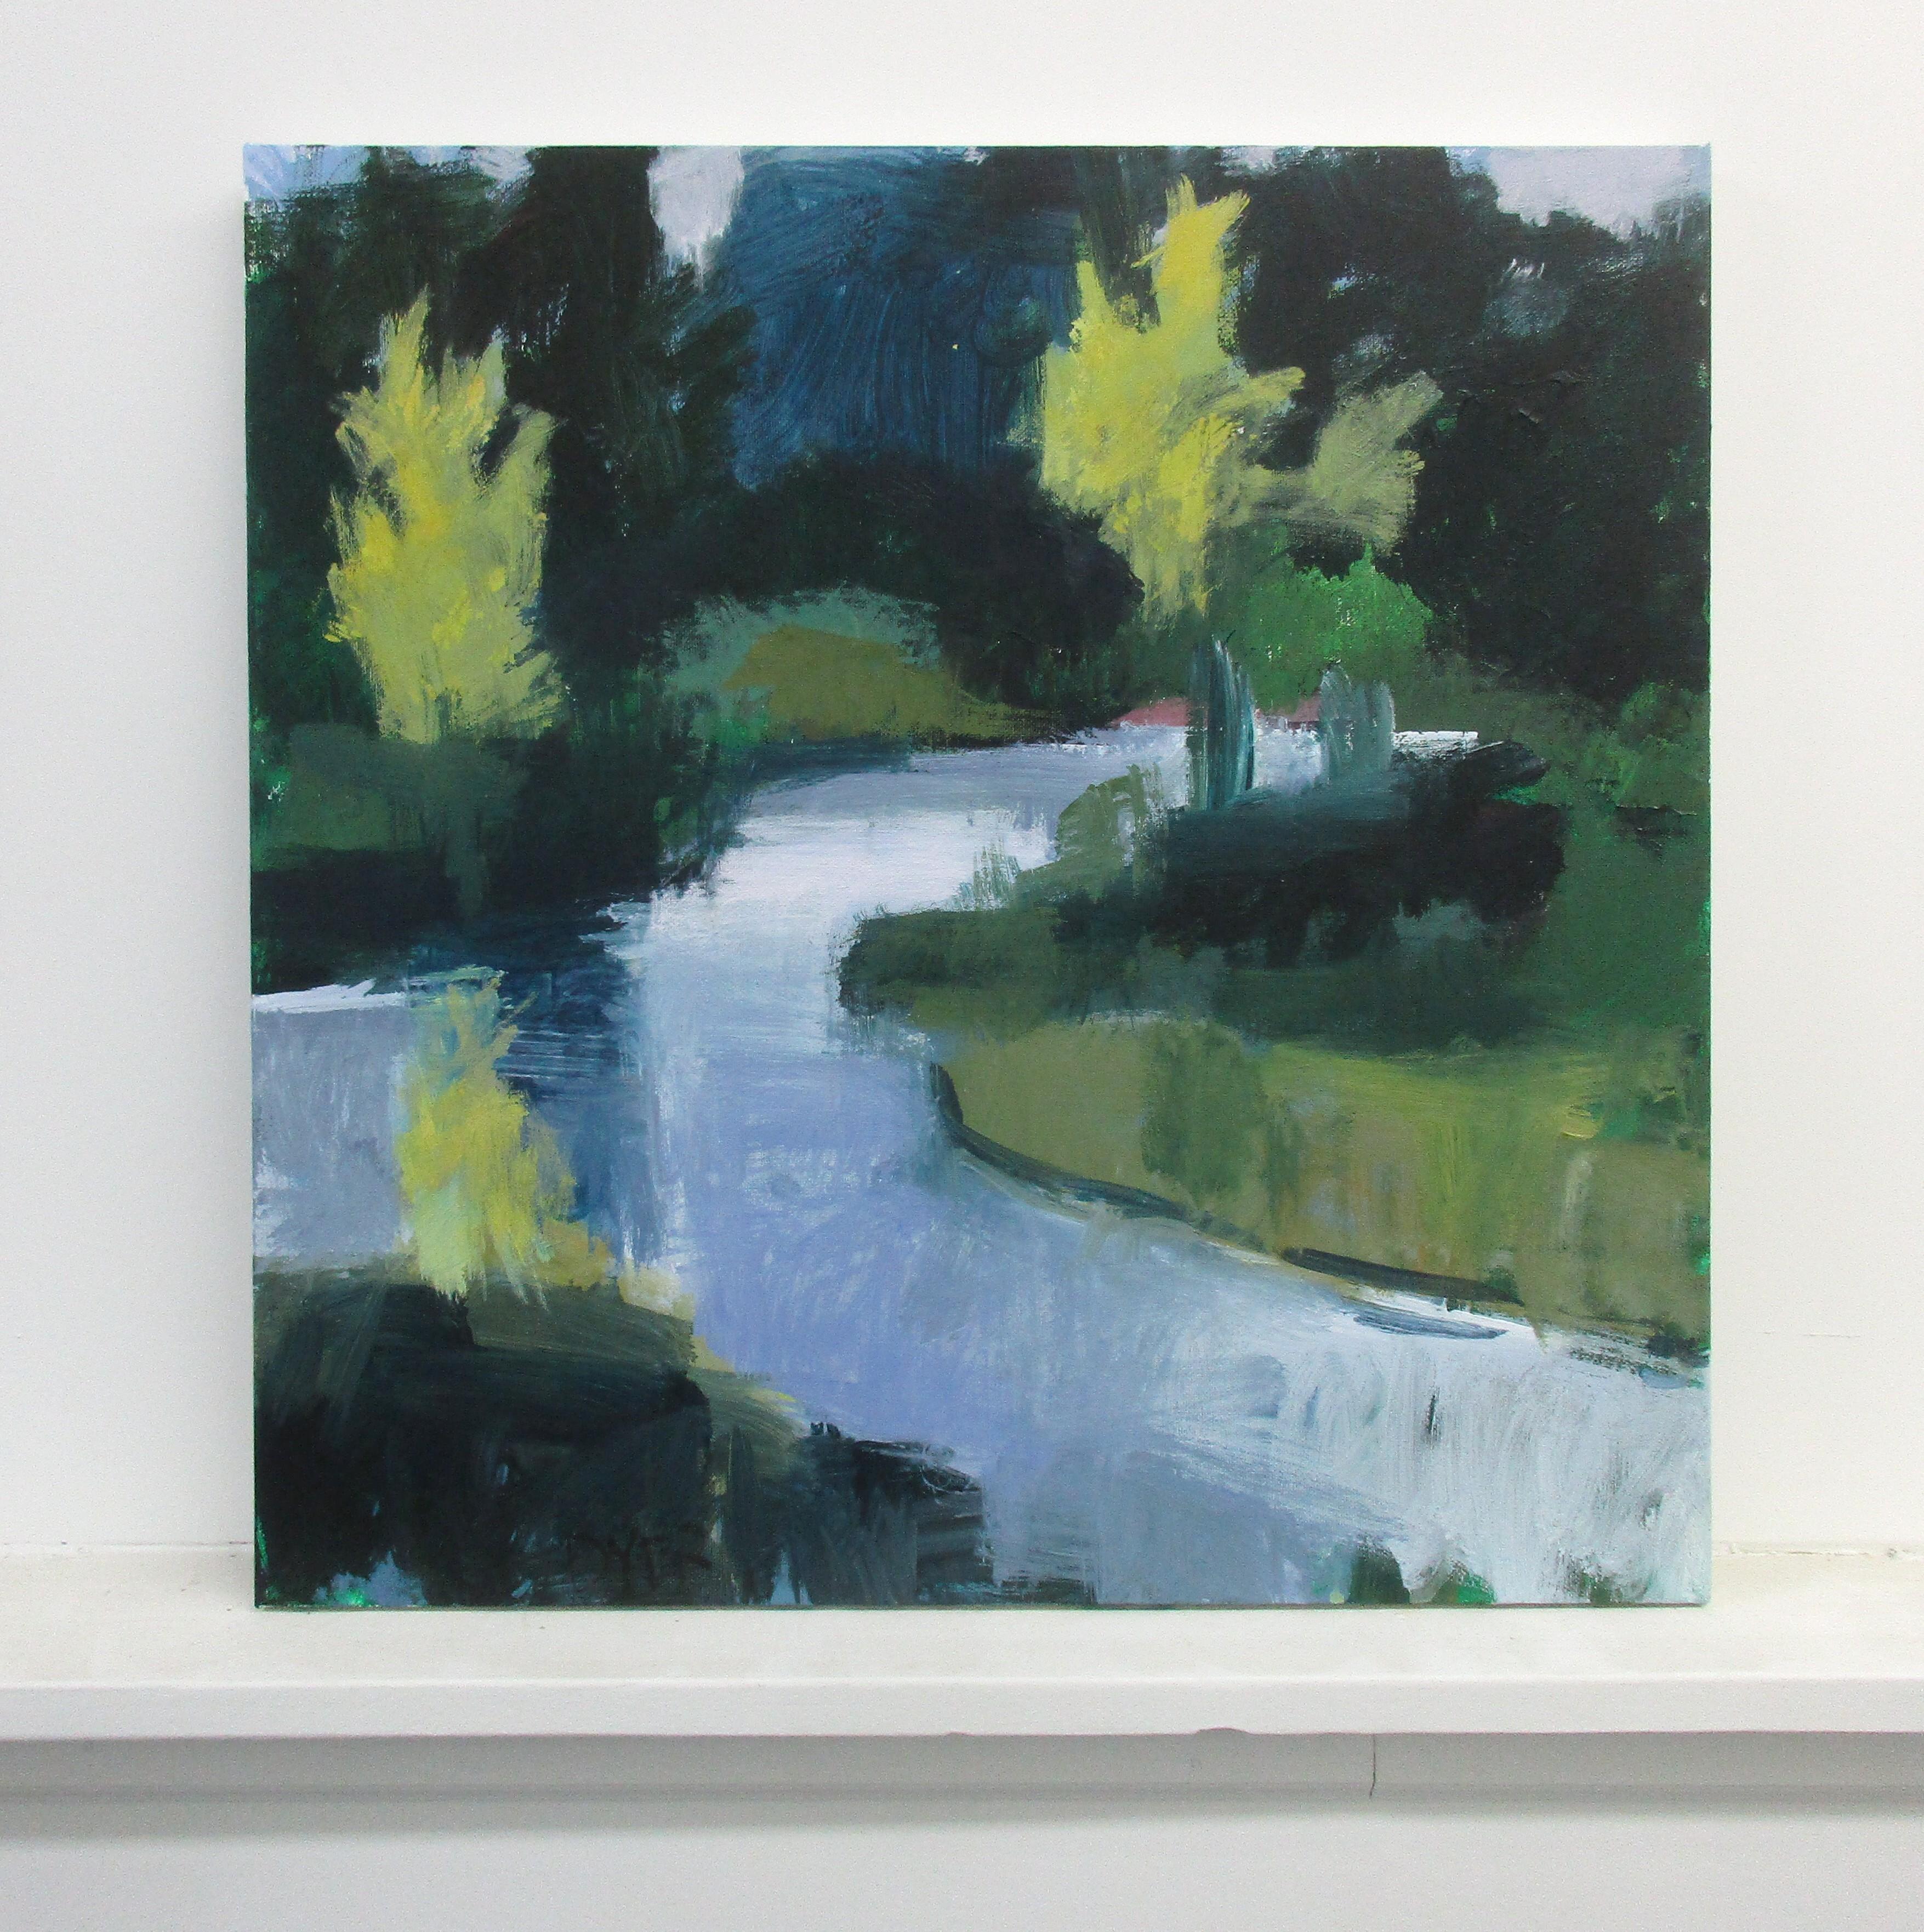 <p>Artist Comments<br />Janet says this painting is based on a detail of a detail of a much larger painting of a river in the Netherlands. A quiet river meanders through a dense green landscape. Simplified palette of greens and blues set the mood of